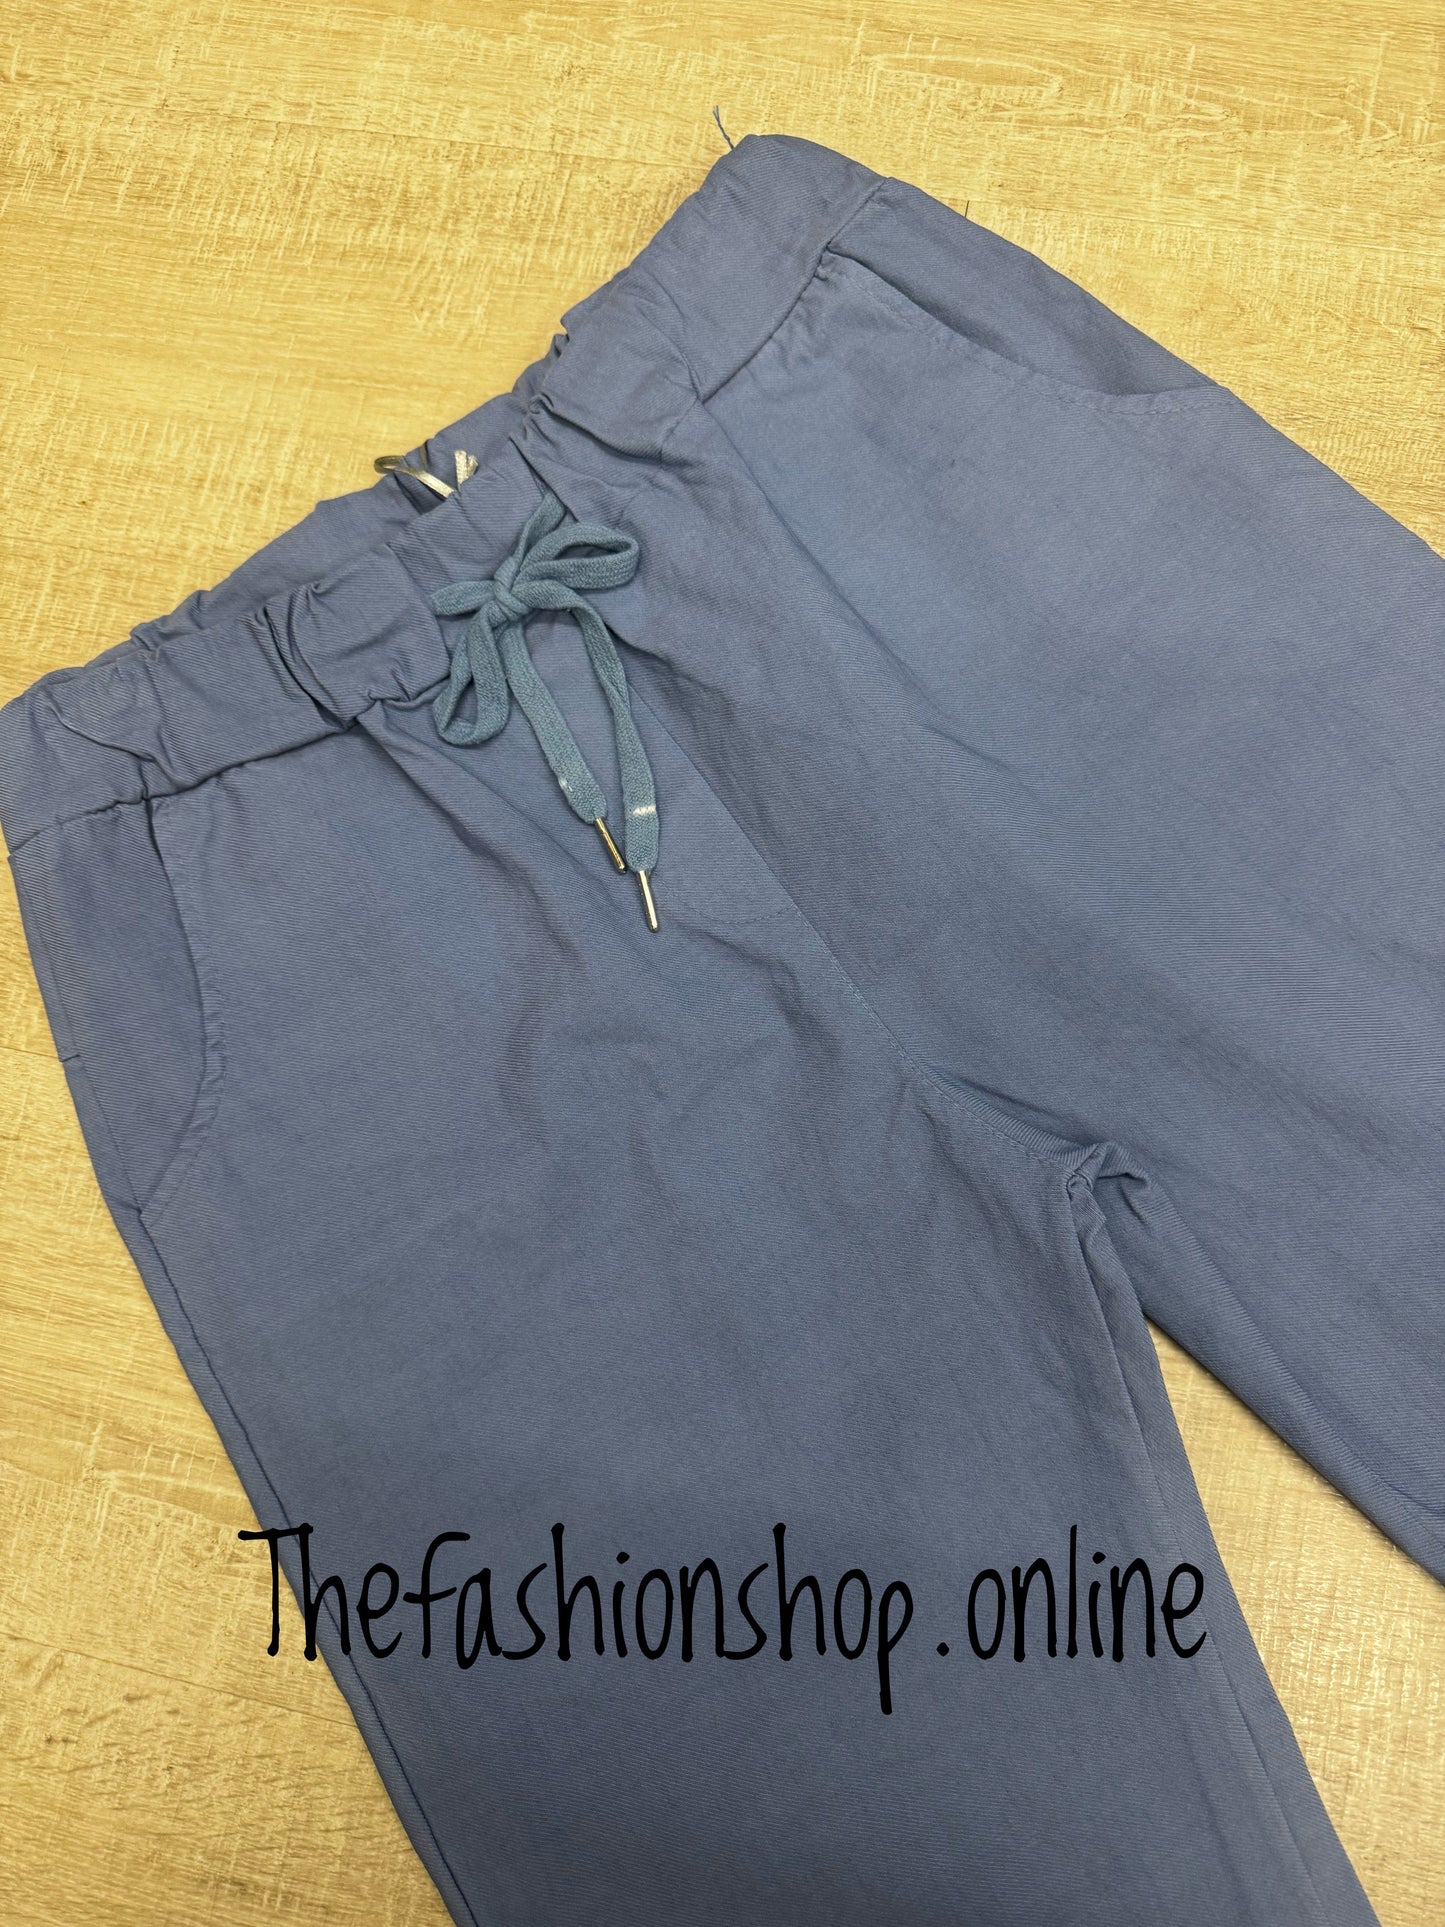 Plus size cornflower blue smooth super stretchy trousers 18-22